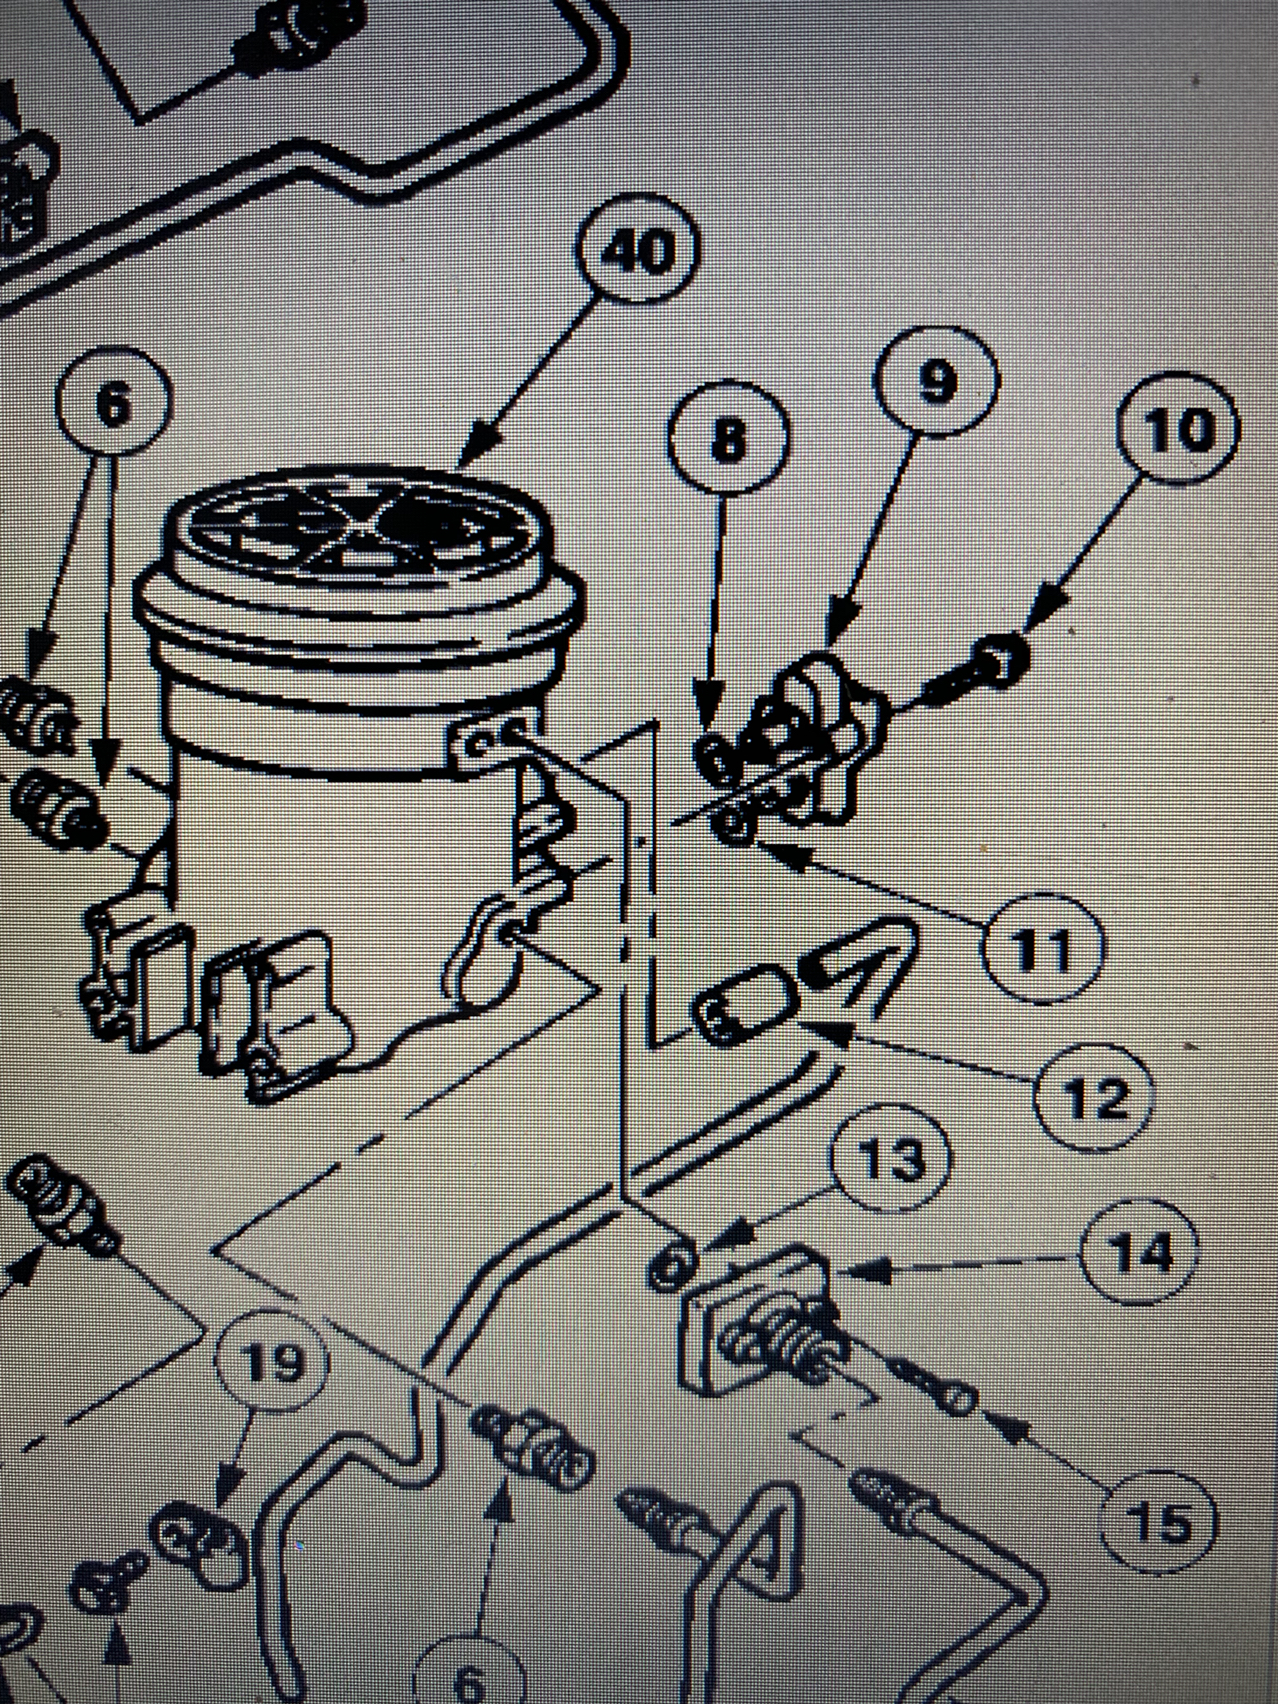 water in fuel sensor location - Ford Truck Enthusiasts Forums